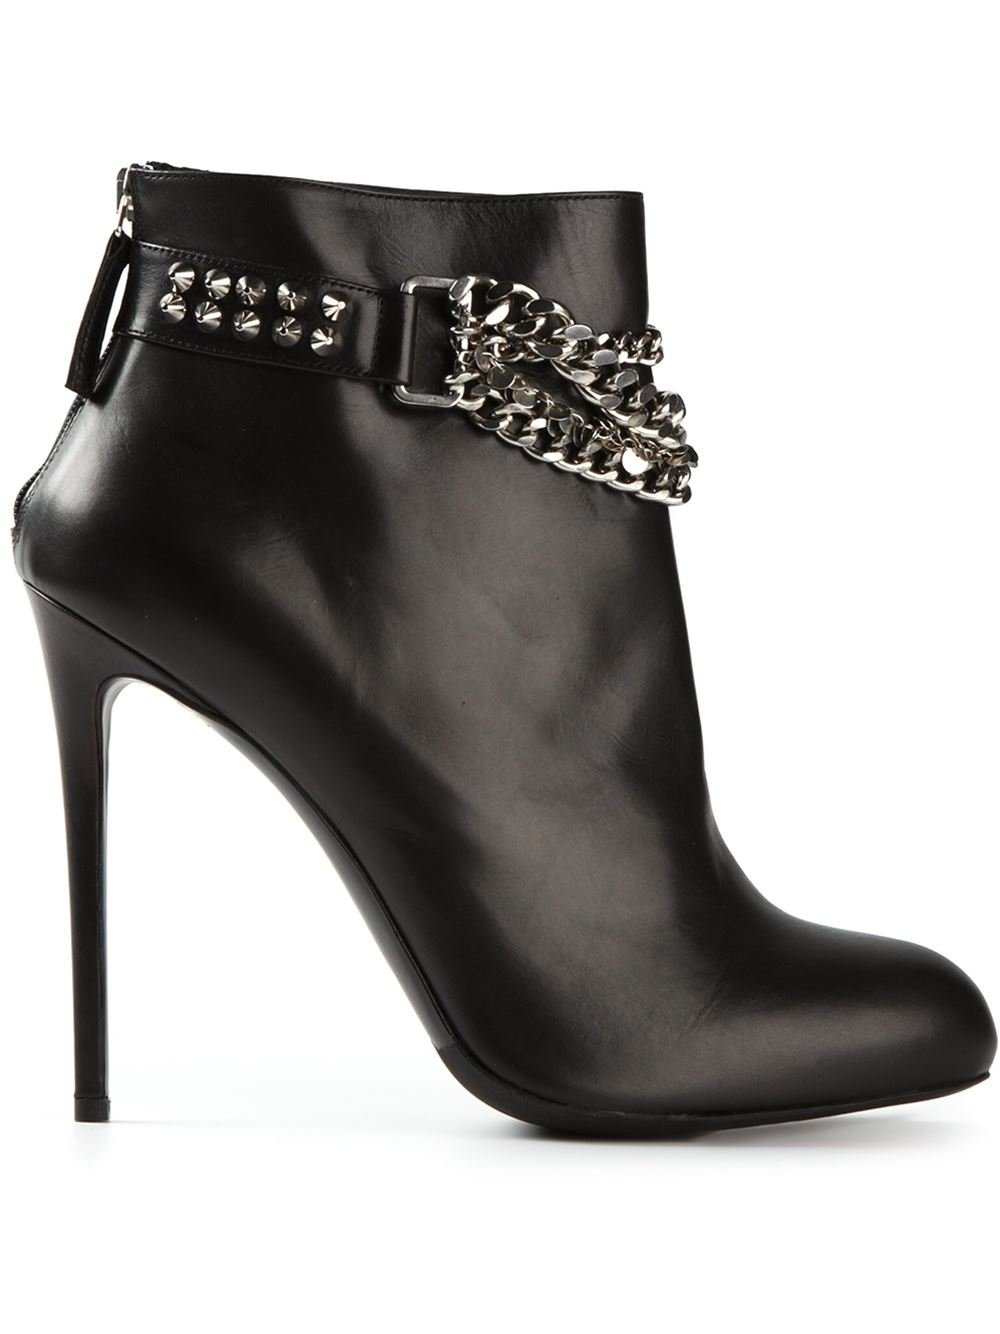 Lyst - Gianmarco Lorenzi Chain Embellished Stiletto Ankle Boots in Black